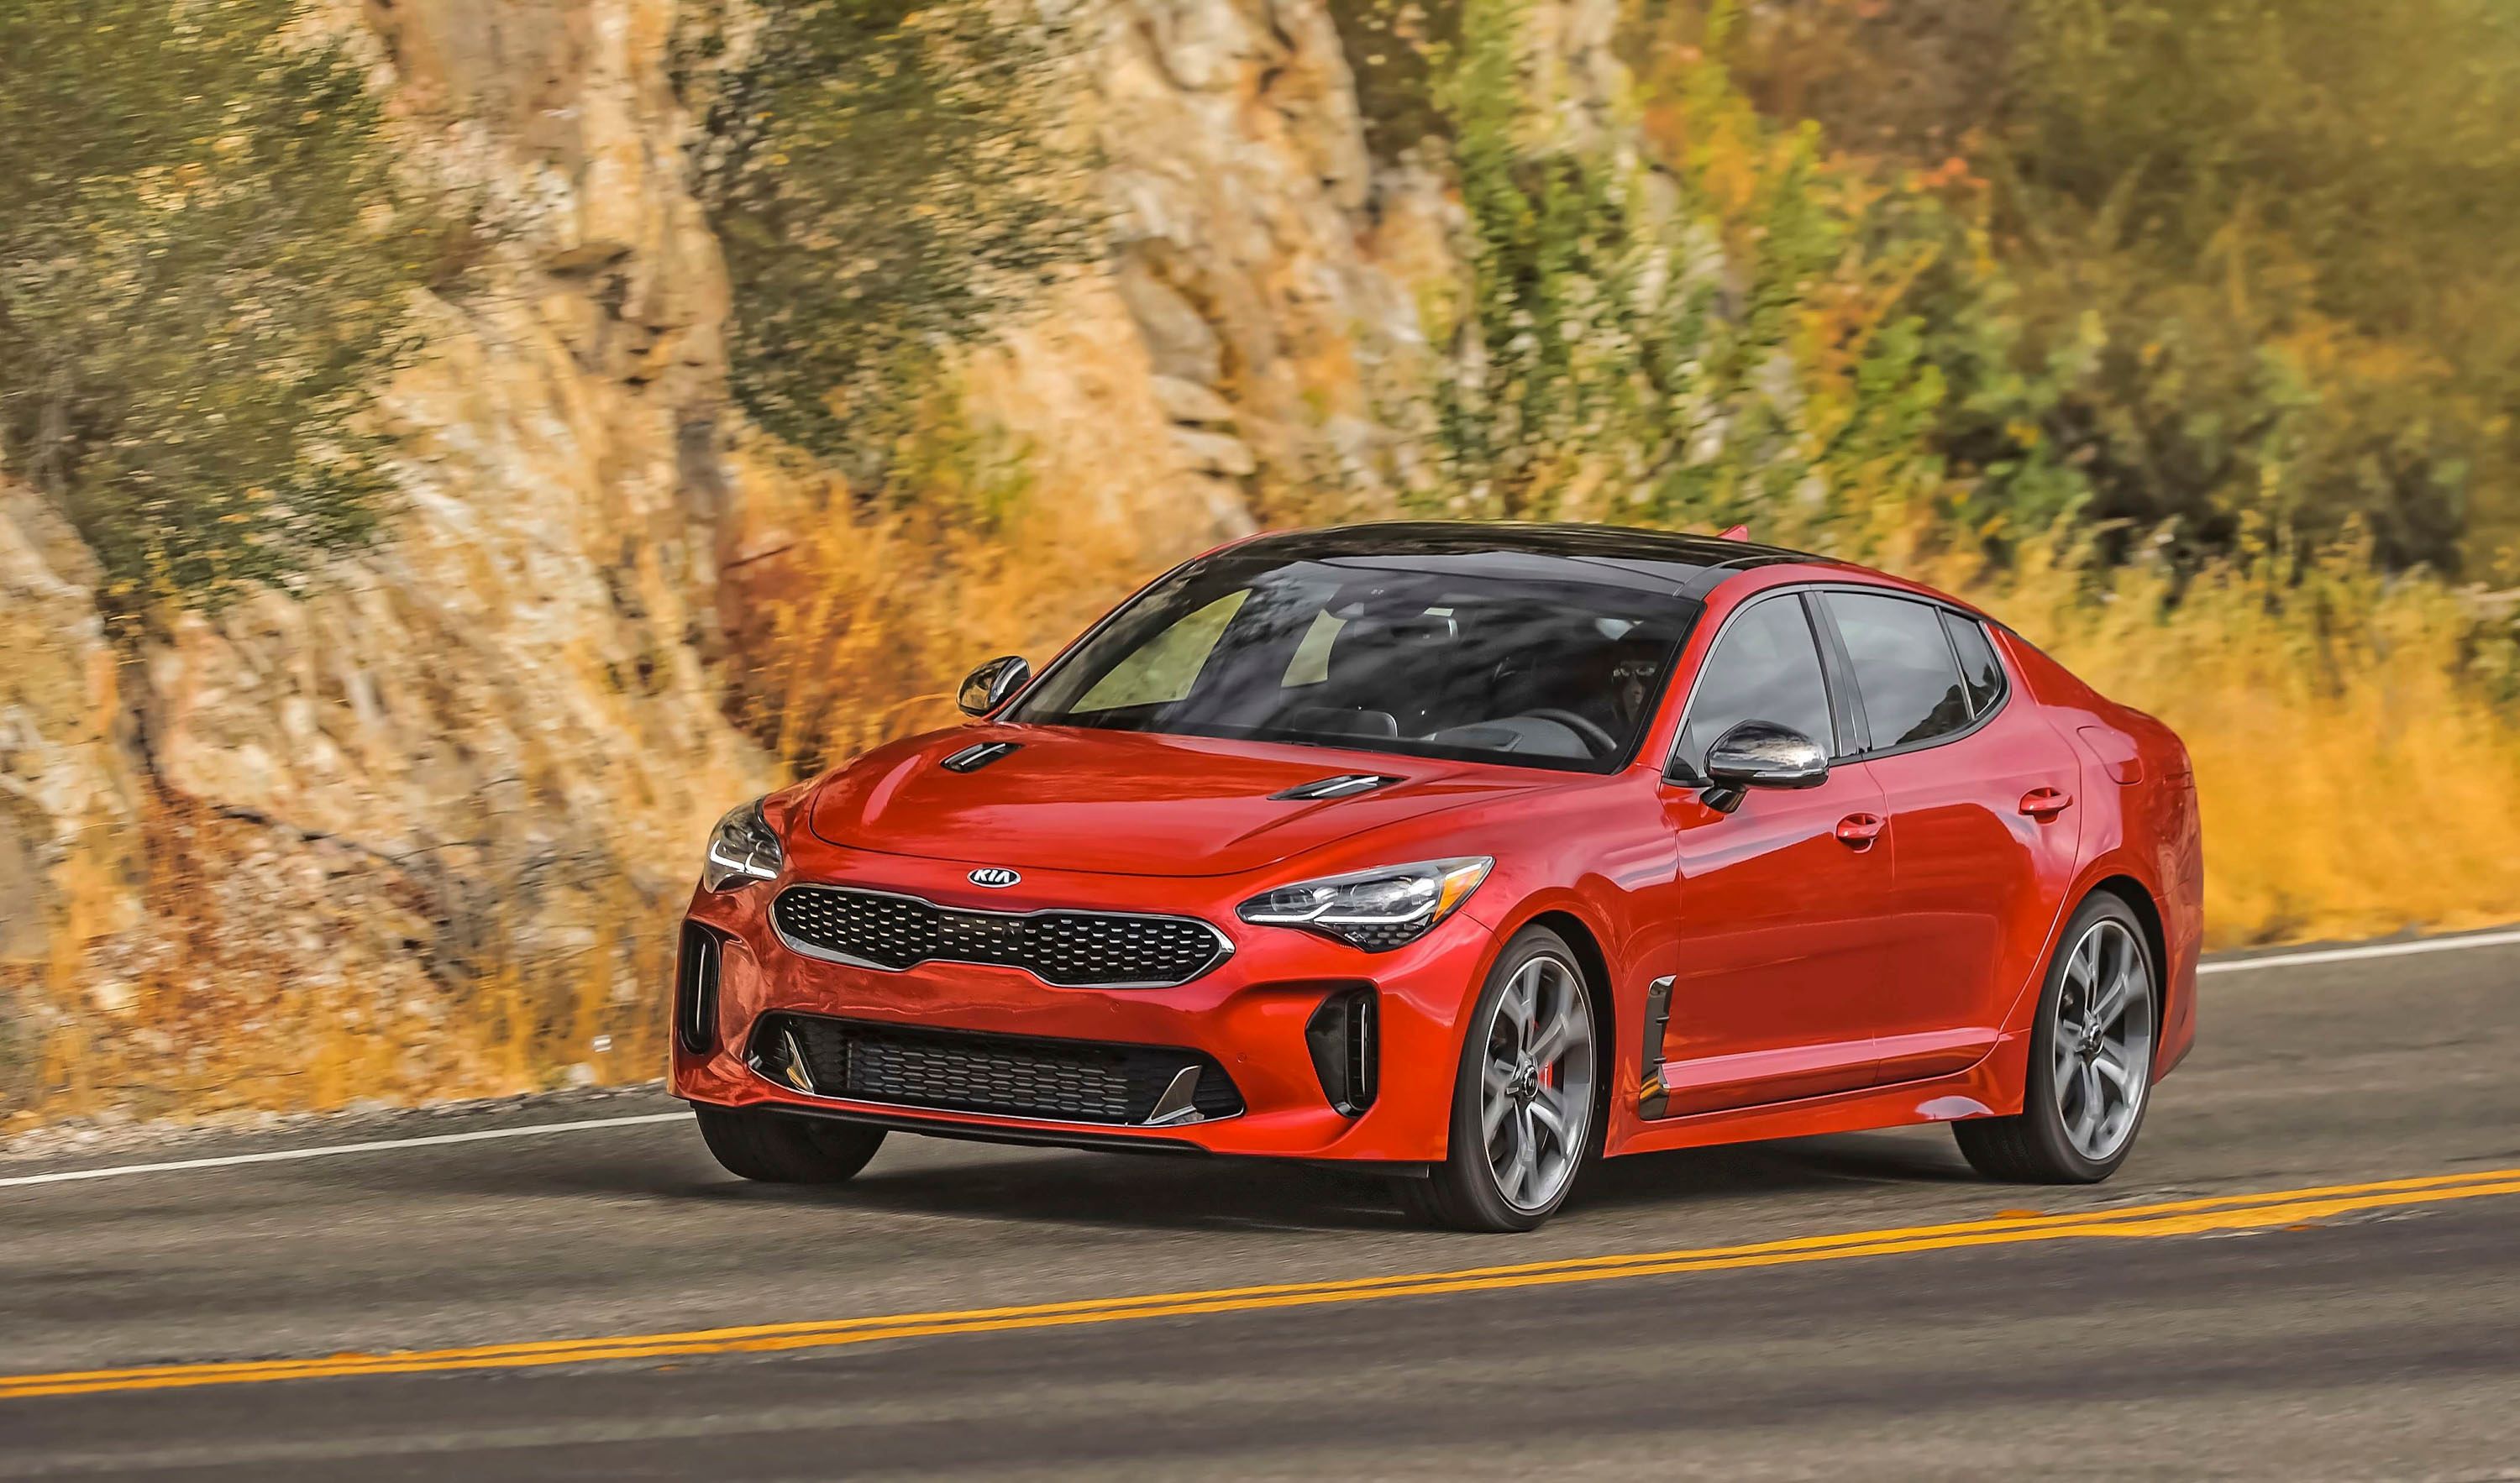 2018 Will Hyundai's Upcoming Supercar Use DNA From the Kia Stinger?